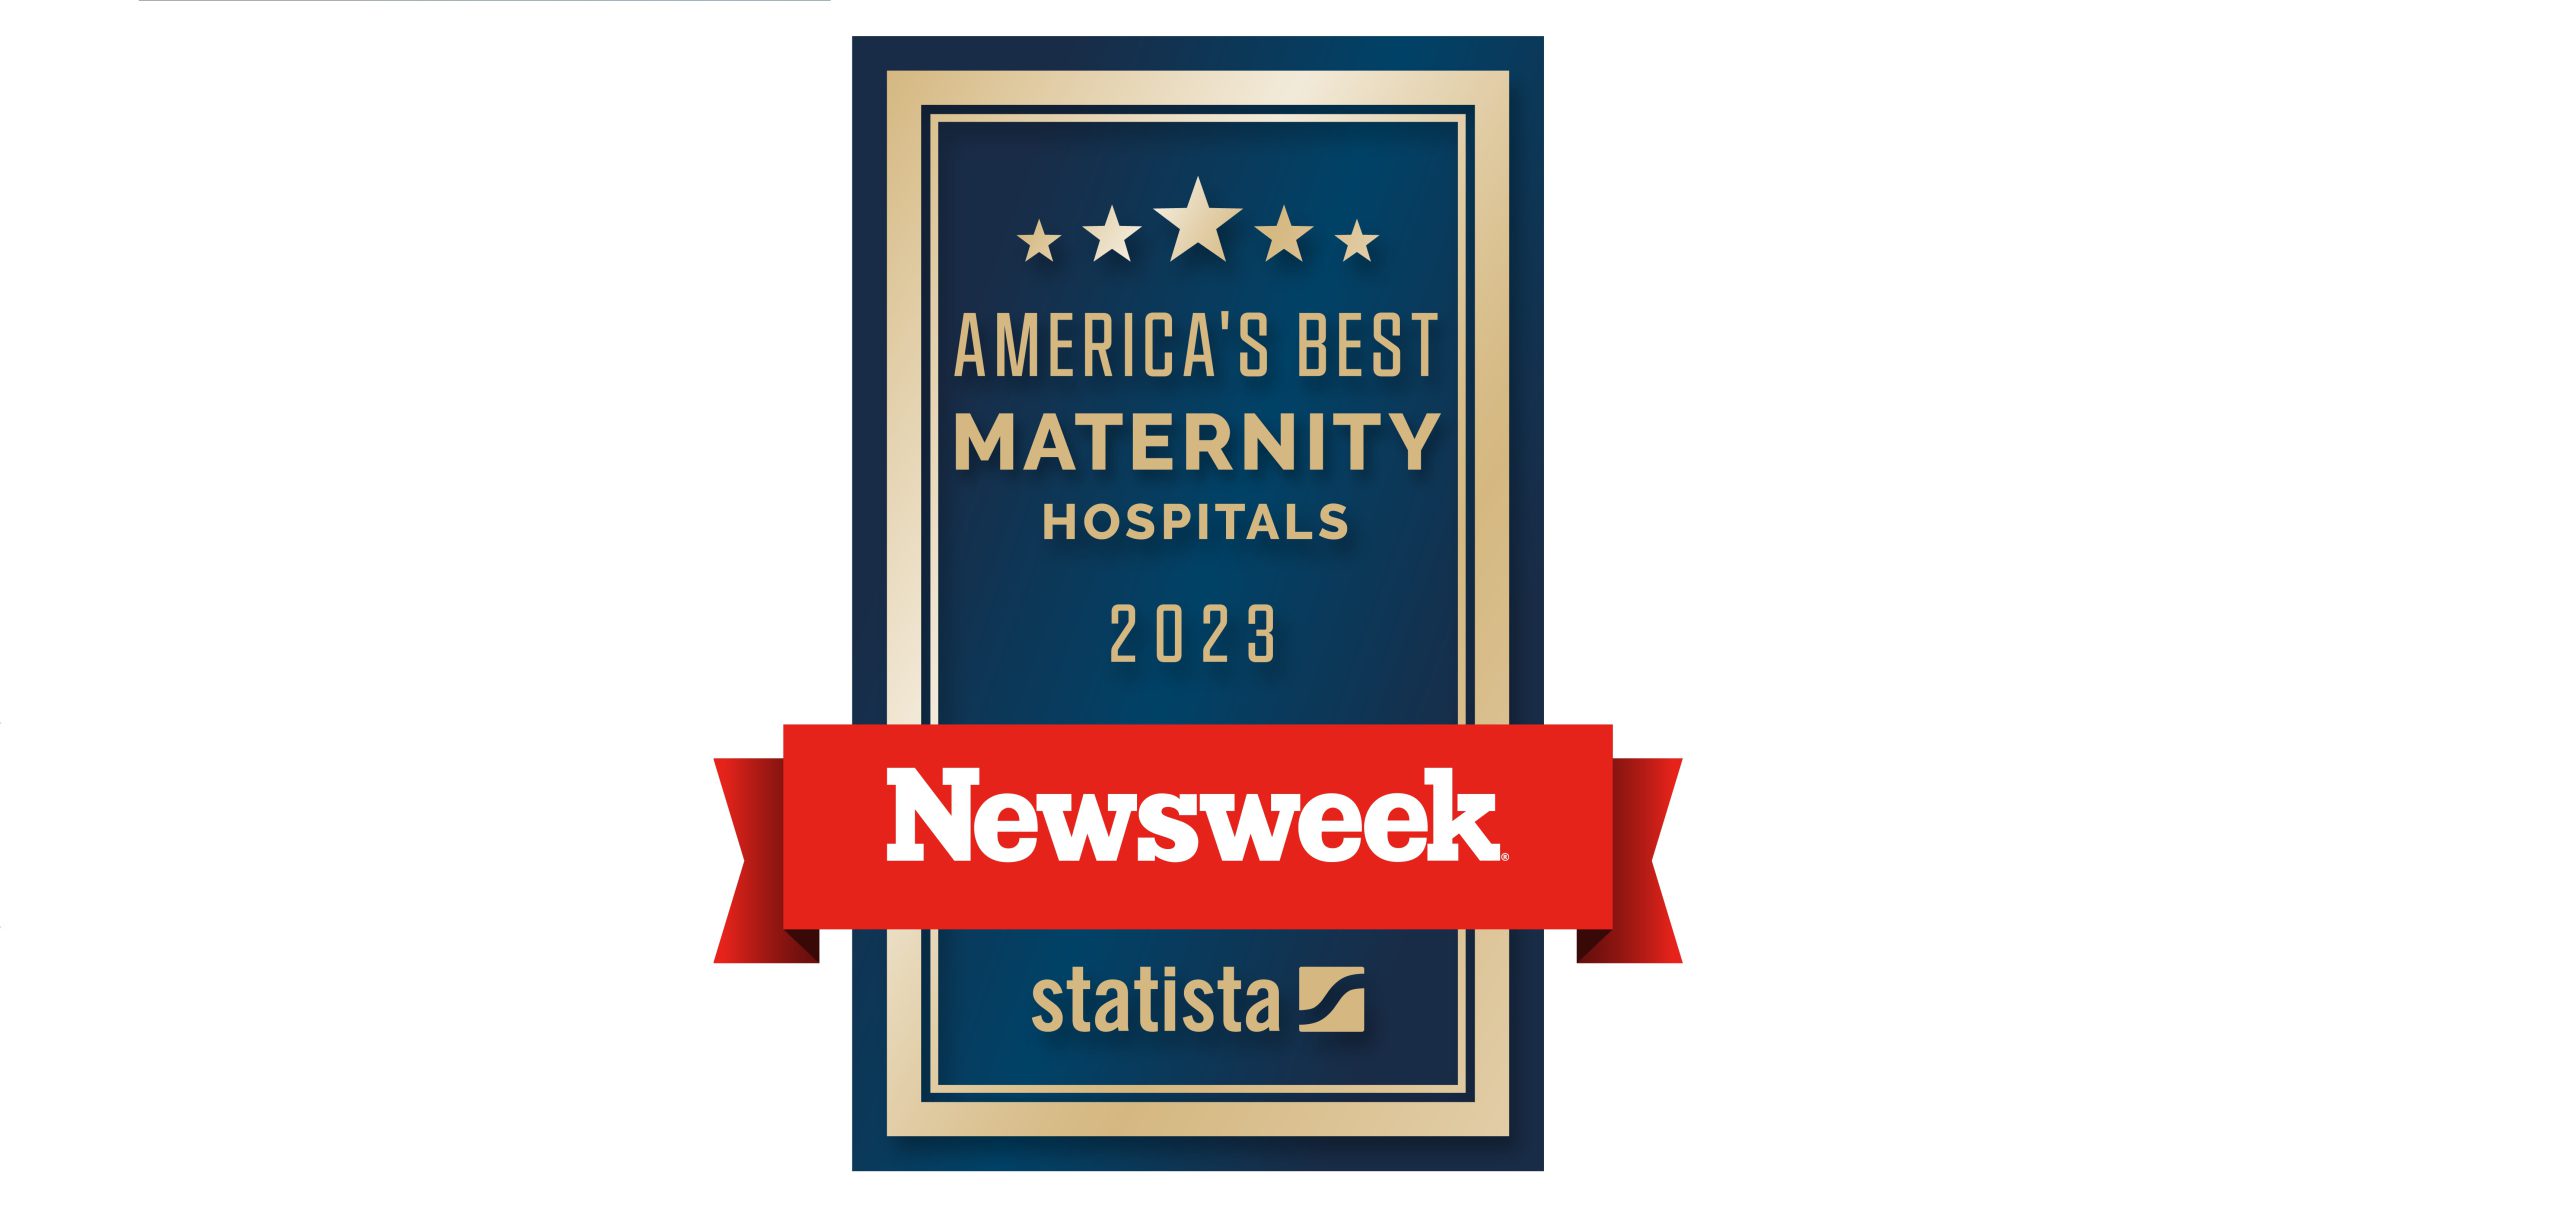 Graphic featuring Newsweek and Statista logos announcing America's Best Maternity Hospitals recognition.